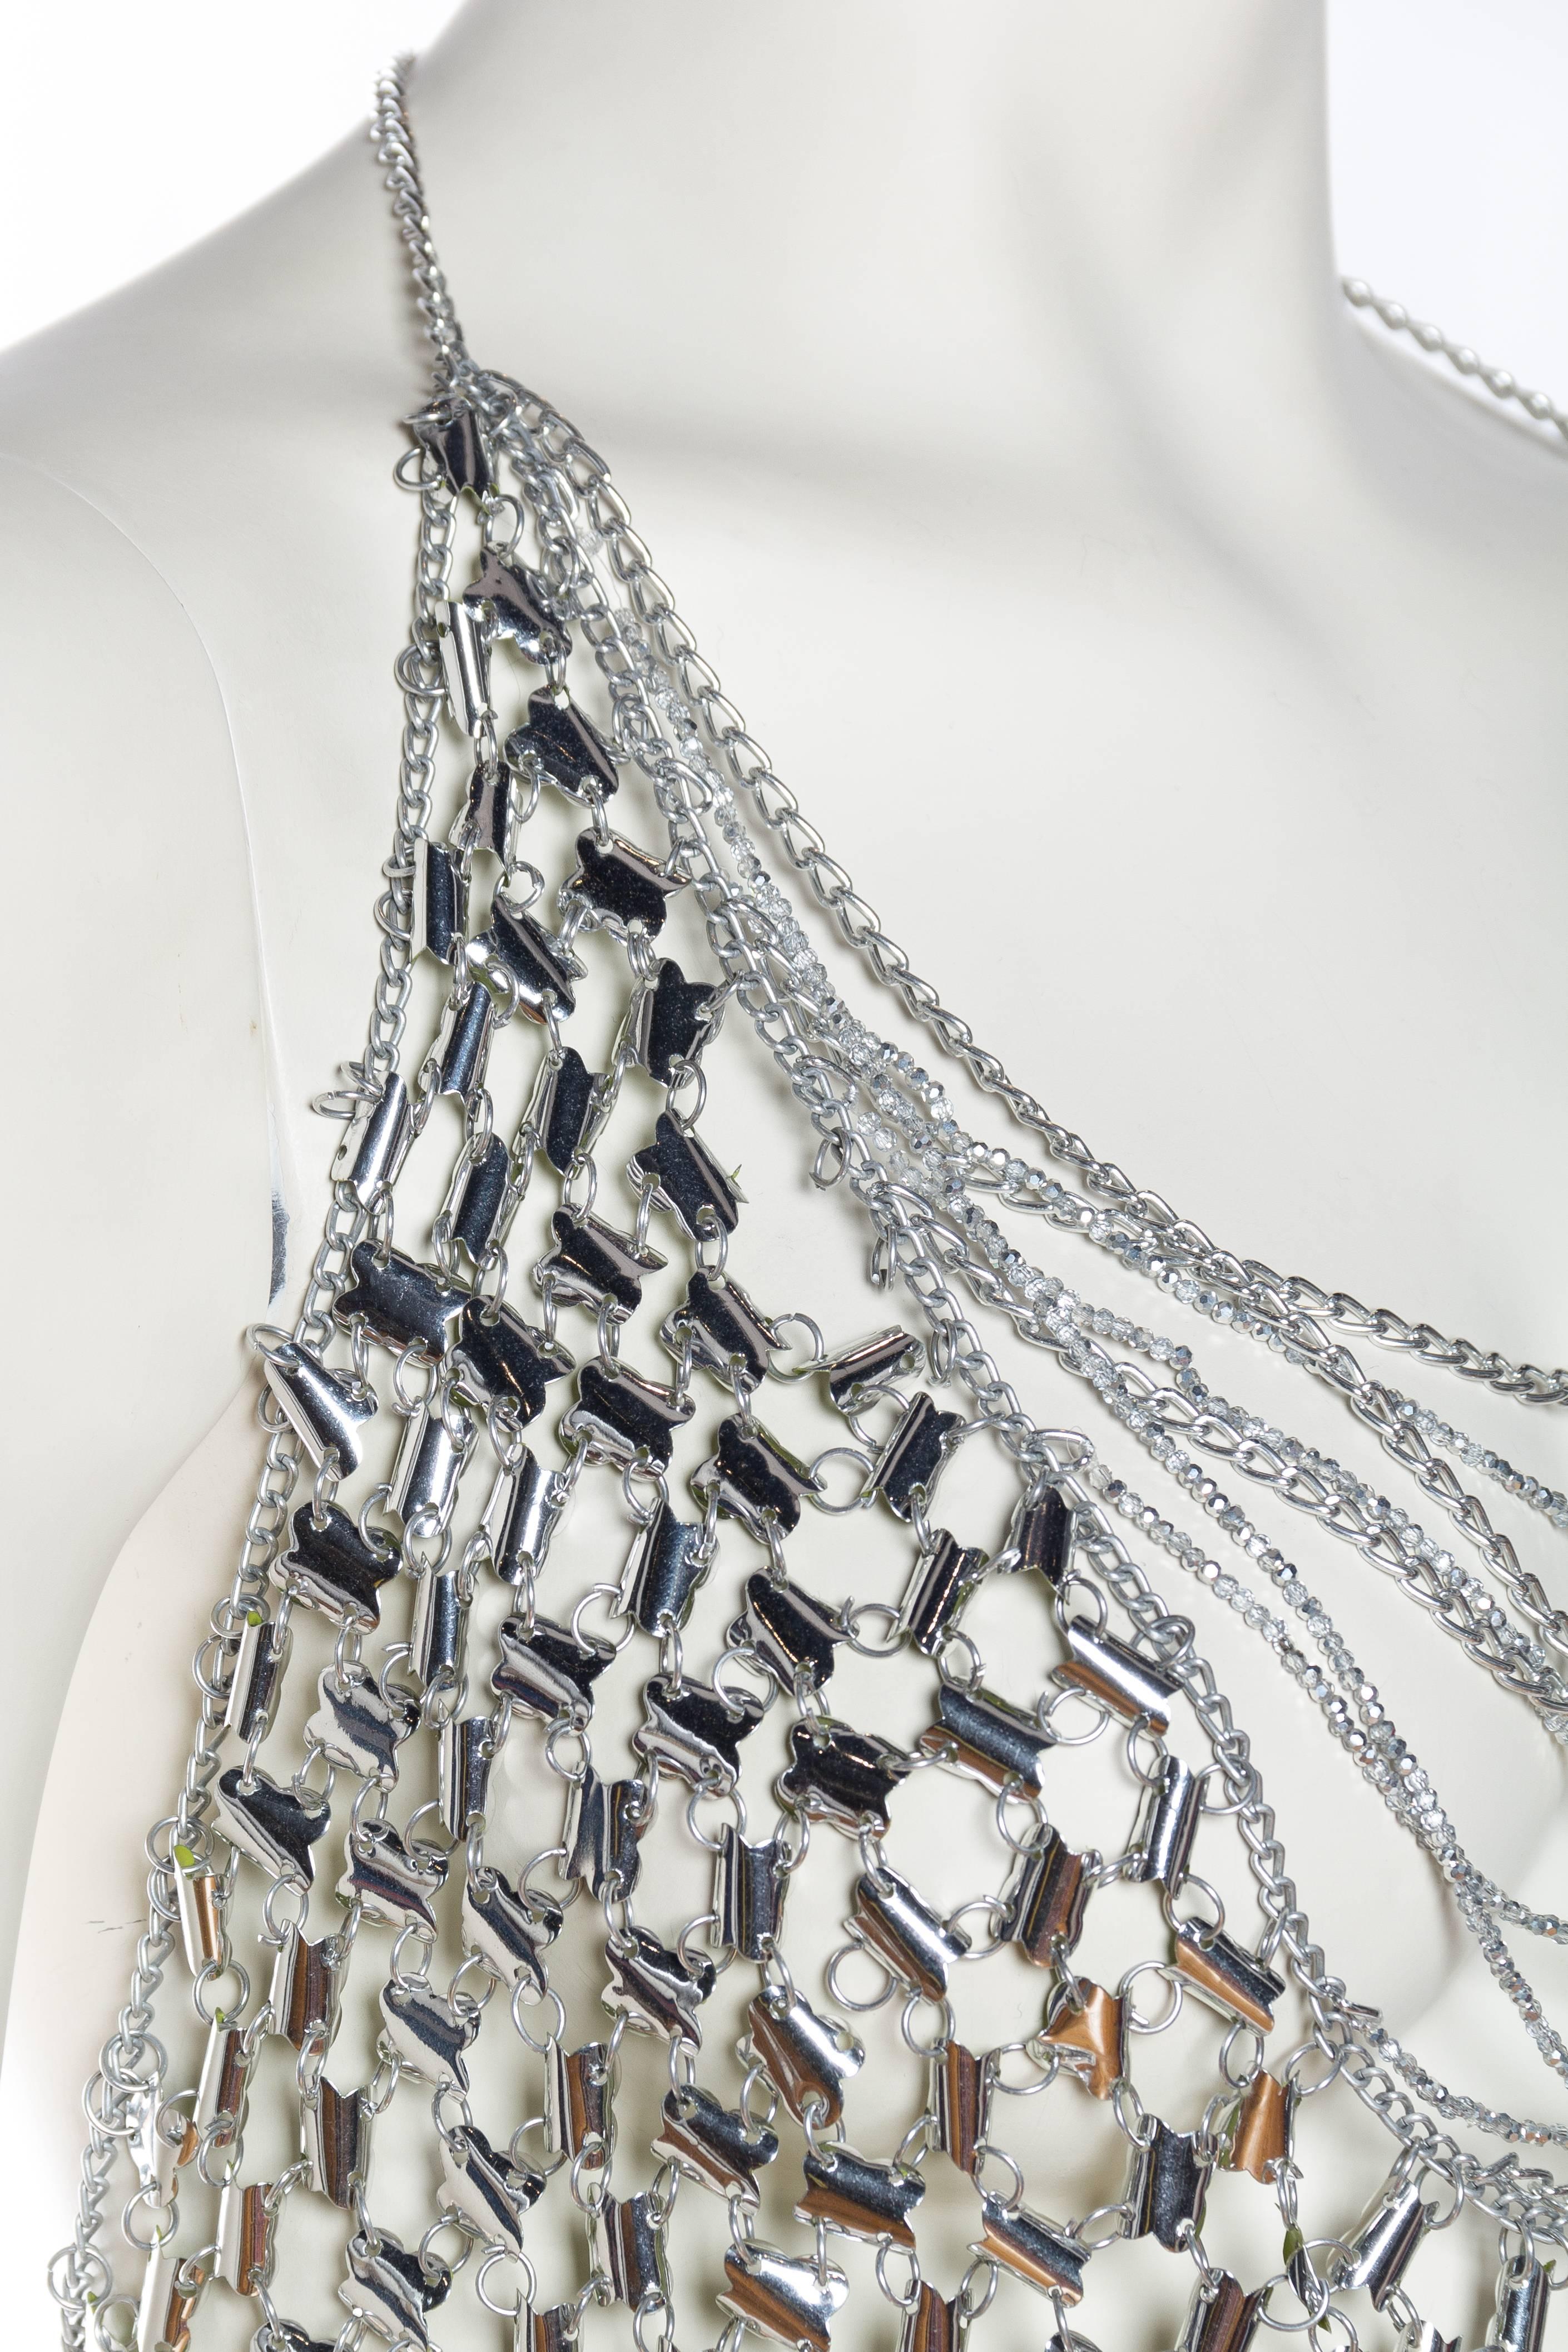 Gray Paco Rabbane Attributed Chainlink Dress with Crystals